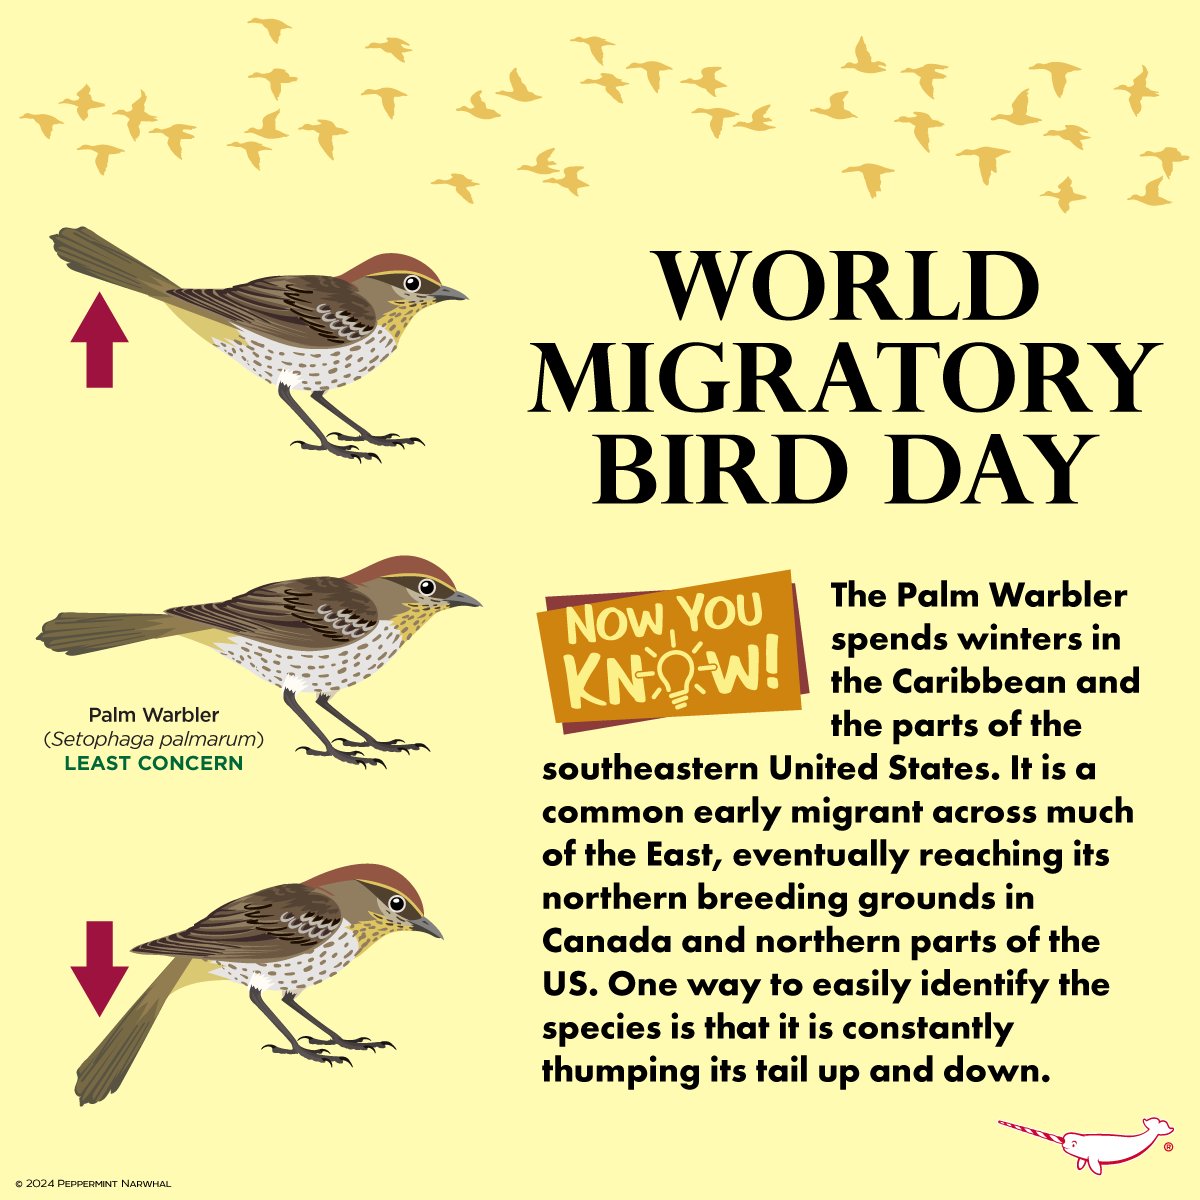 #WorldMigratoryBirdDay
#NowYouKnow #PalmWarbler

Shop the #PeppermintNarwhal store:
peppermintnarwhal.com

International Shoppers visit our store on Etsy: 
etsy.com/shop/Peppermin…

#MigratoryBirdDay #BirdMigration